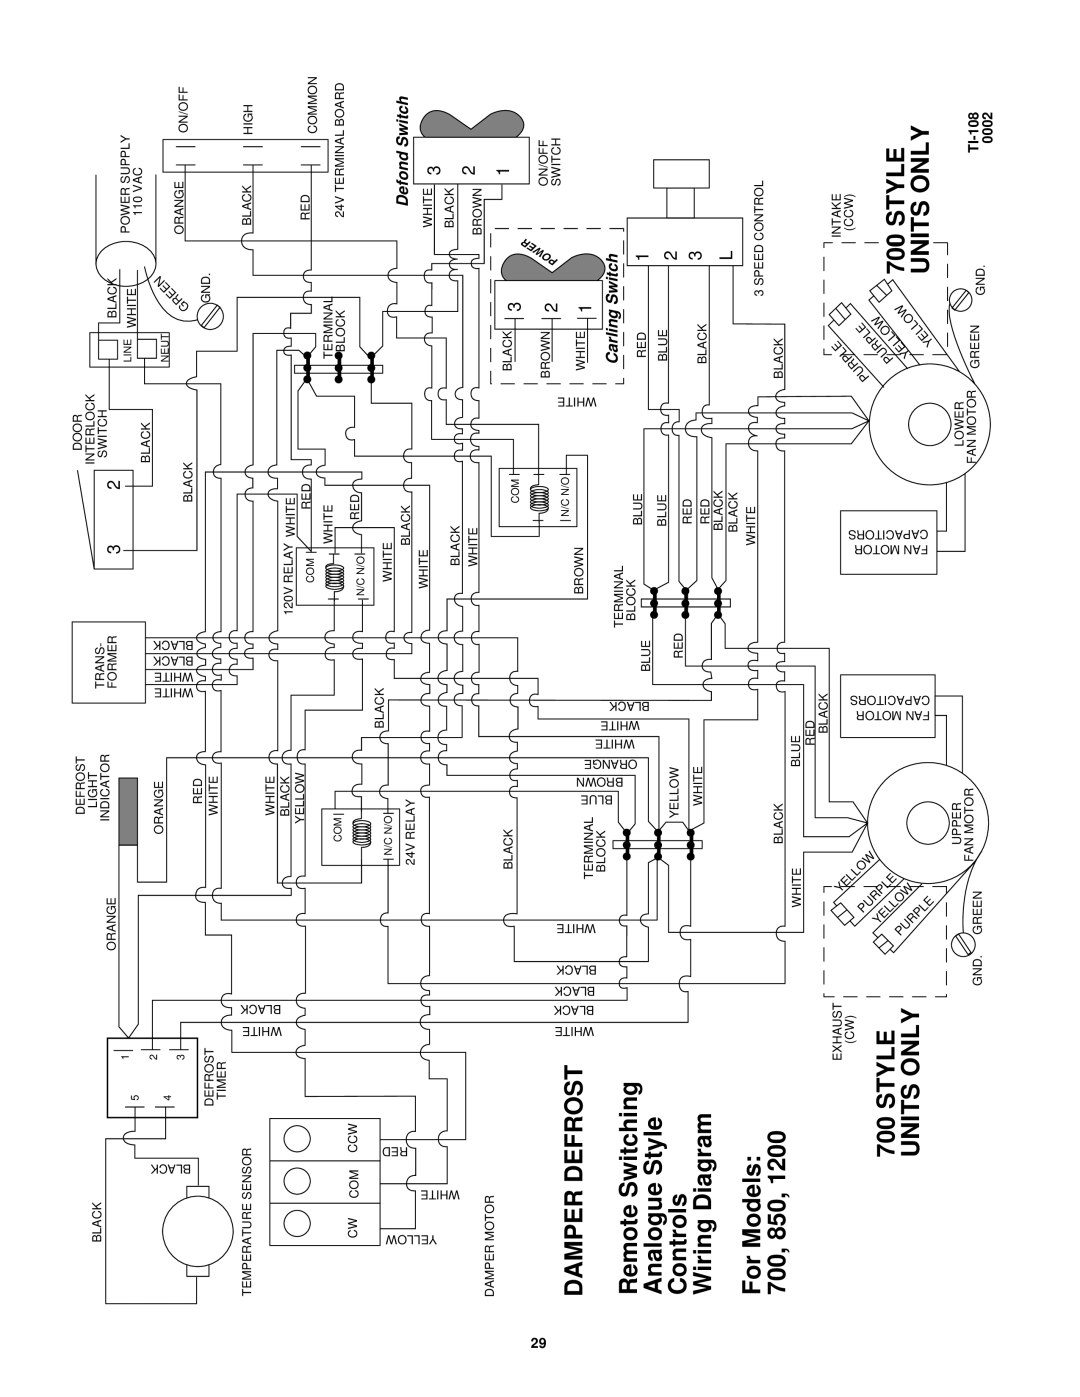 Lifebreath 500ERV, 700ERV 700, 850, Damper Defrost, Remote Switching, Analogue Style, Controls, Wiring Diagram, For Models 